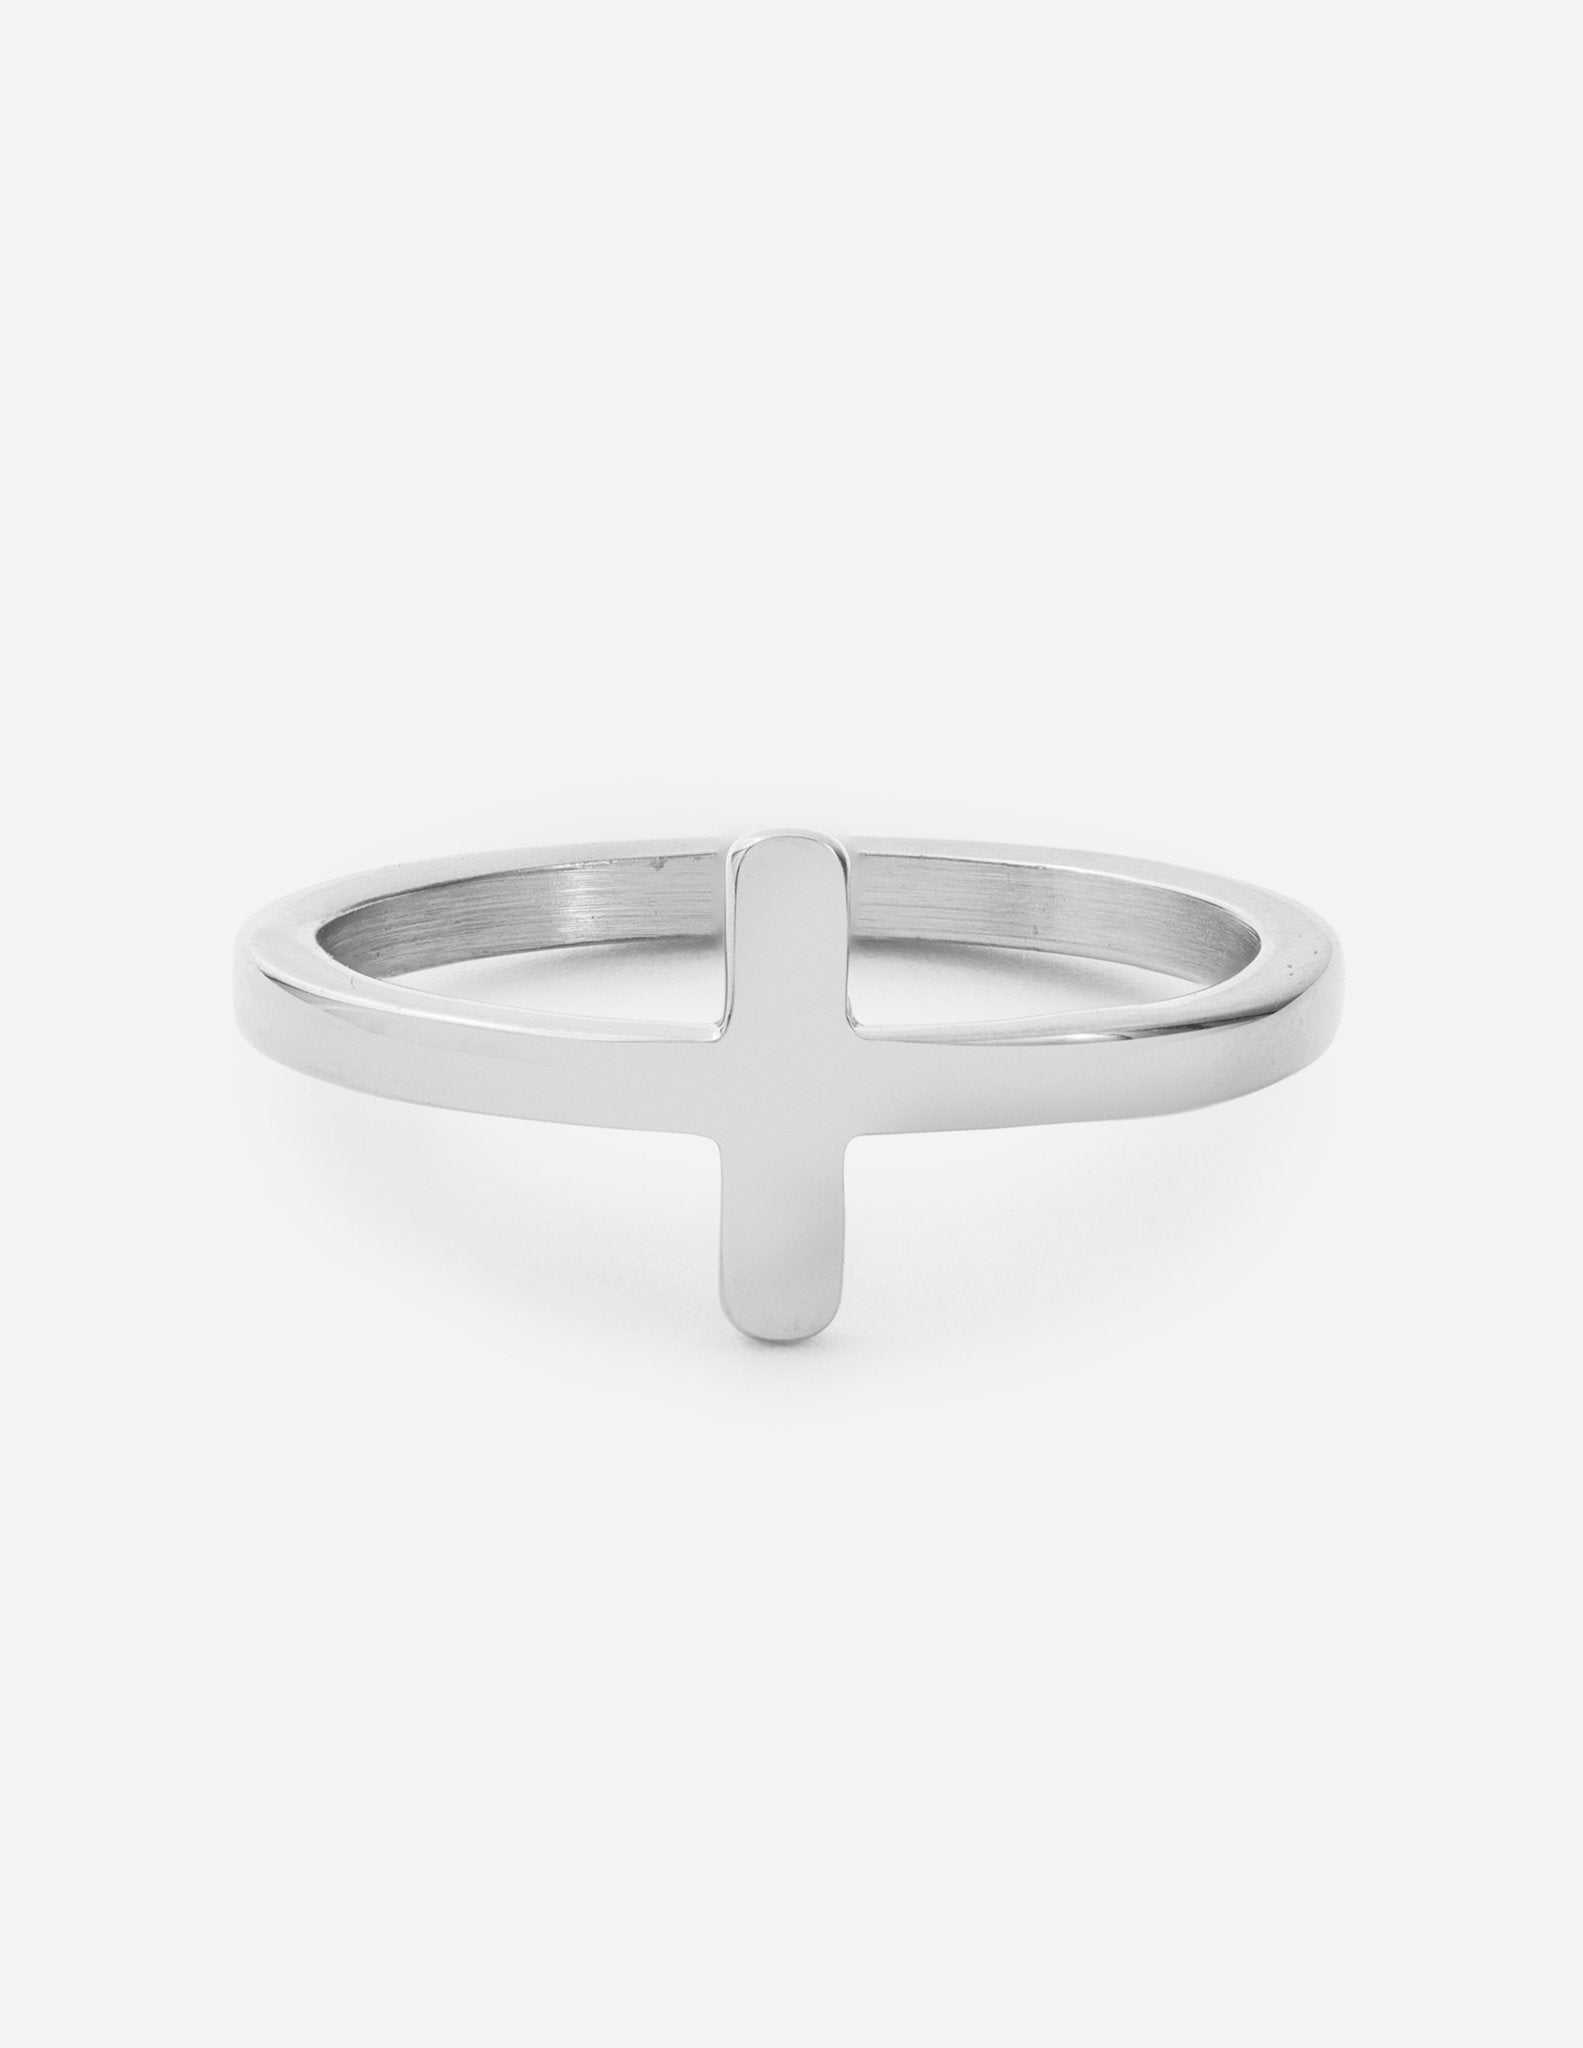 Crucifix Ring 925 Sterling Silver Jewelry Resizable Adjustable 7-12 -